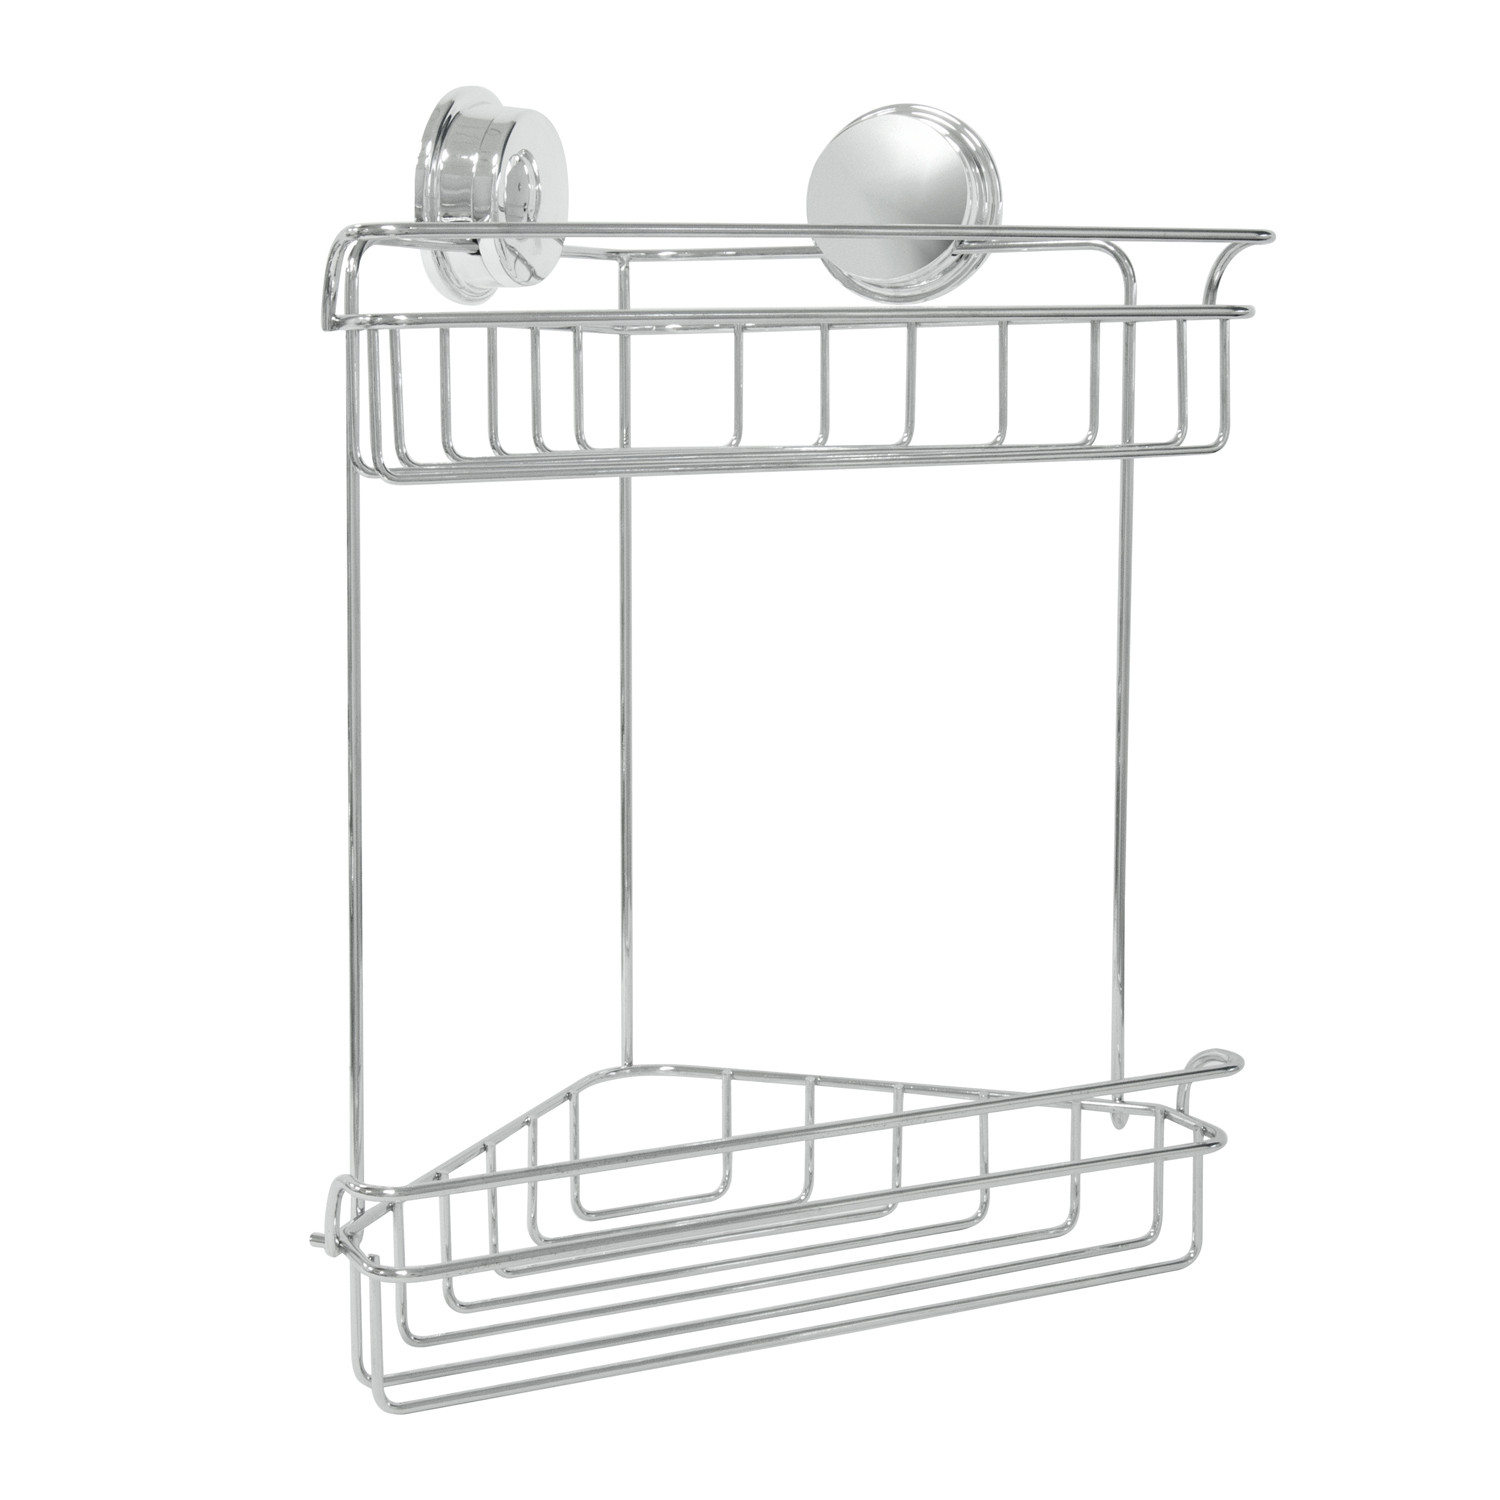 2 Tier Chrome Peel and Fix Corner Shower Caddy Image